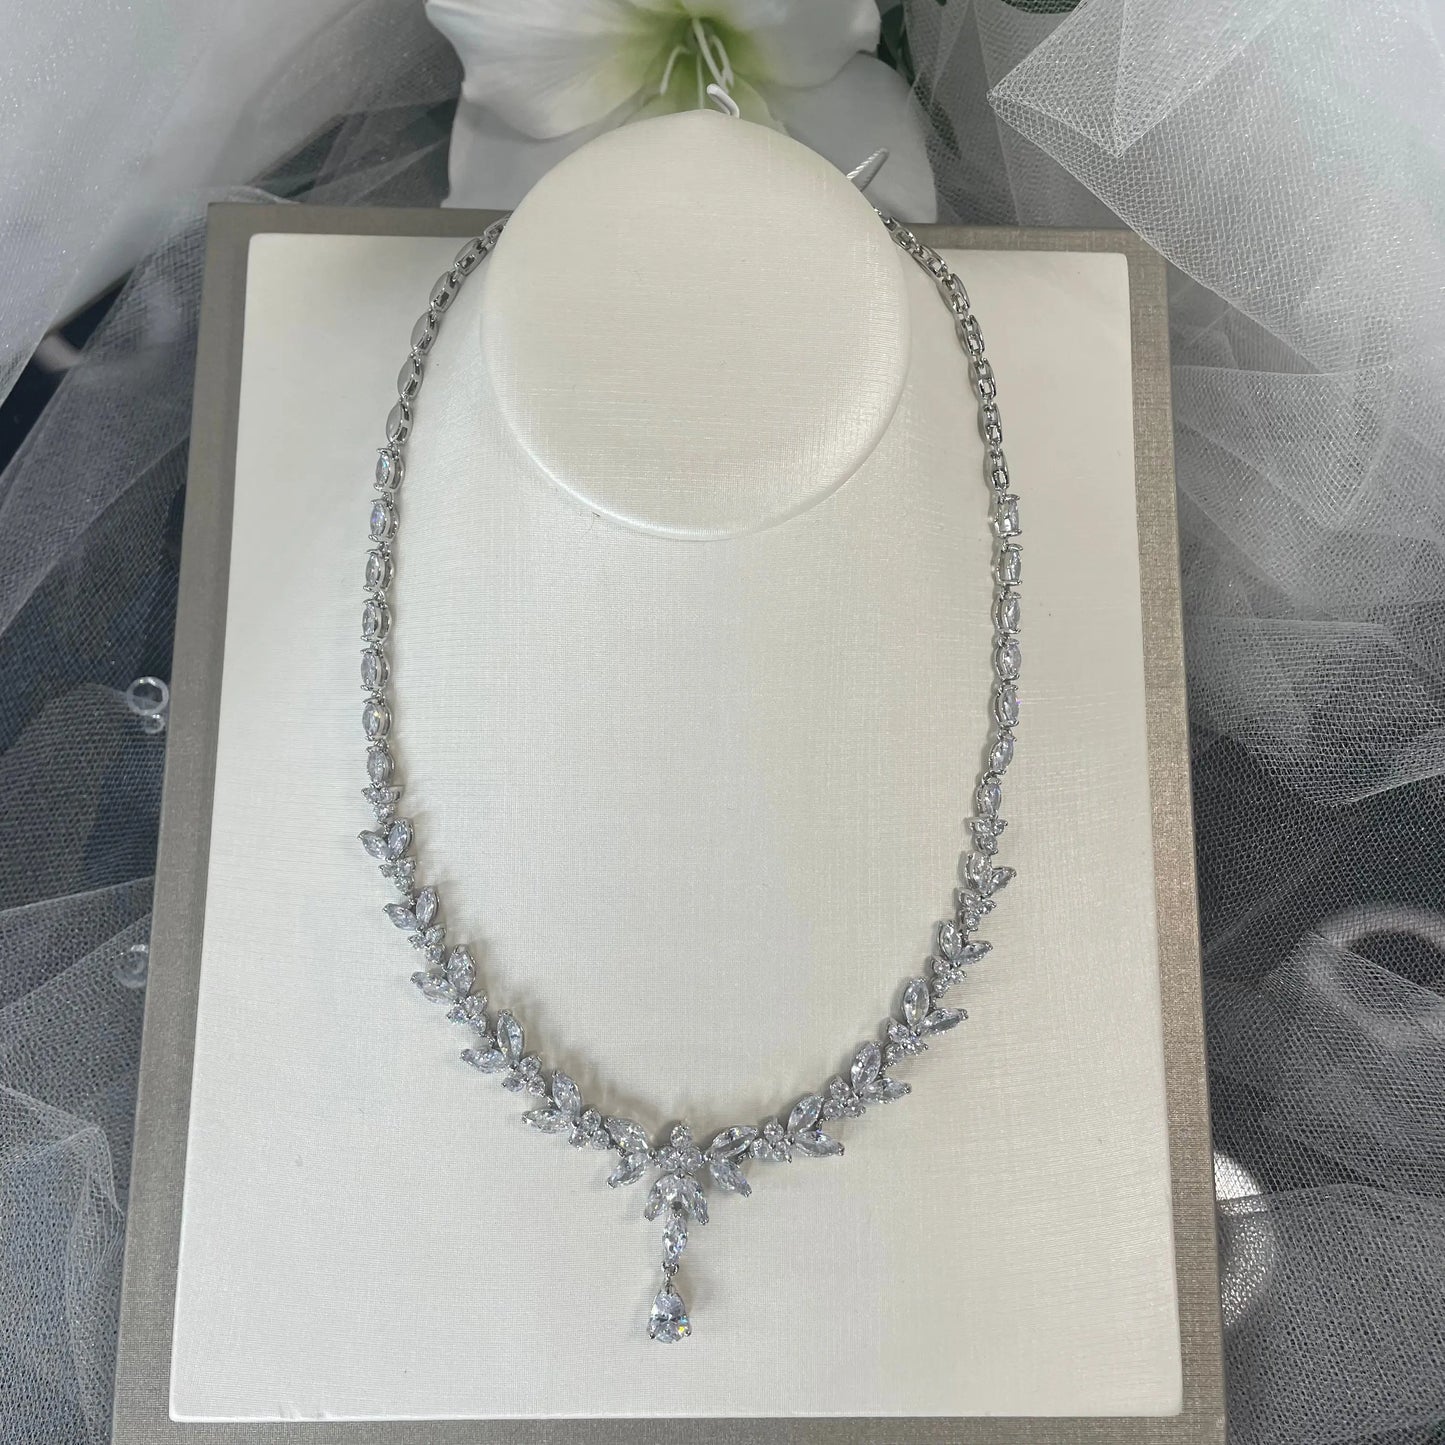 Silver Necklace: An elegant silver necklace with a leaf and flower design adorned with clear cubic zirconia.